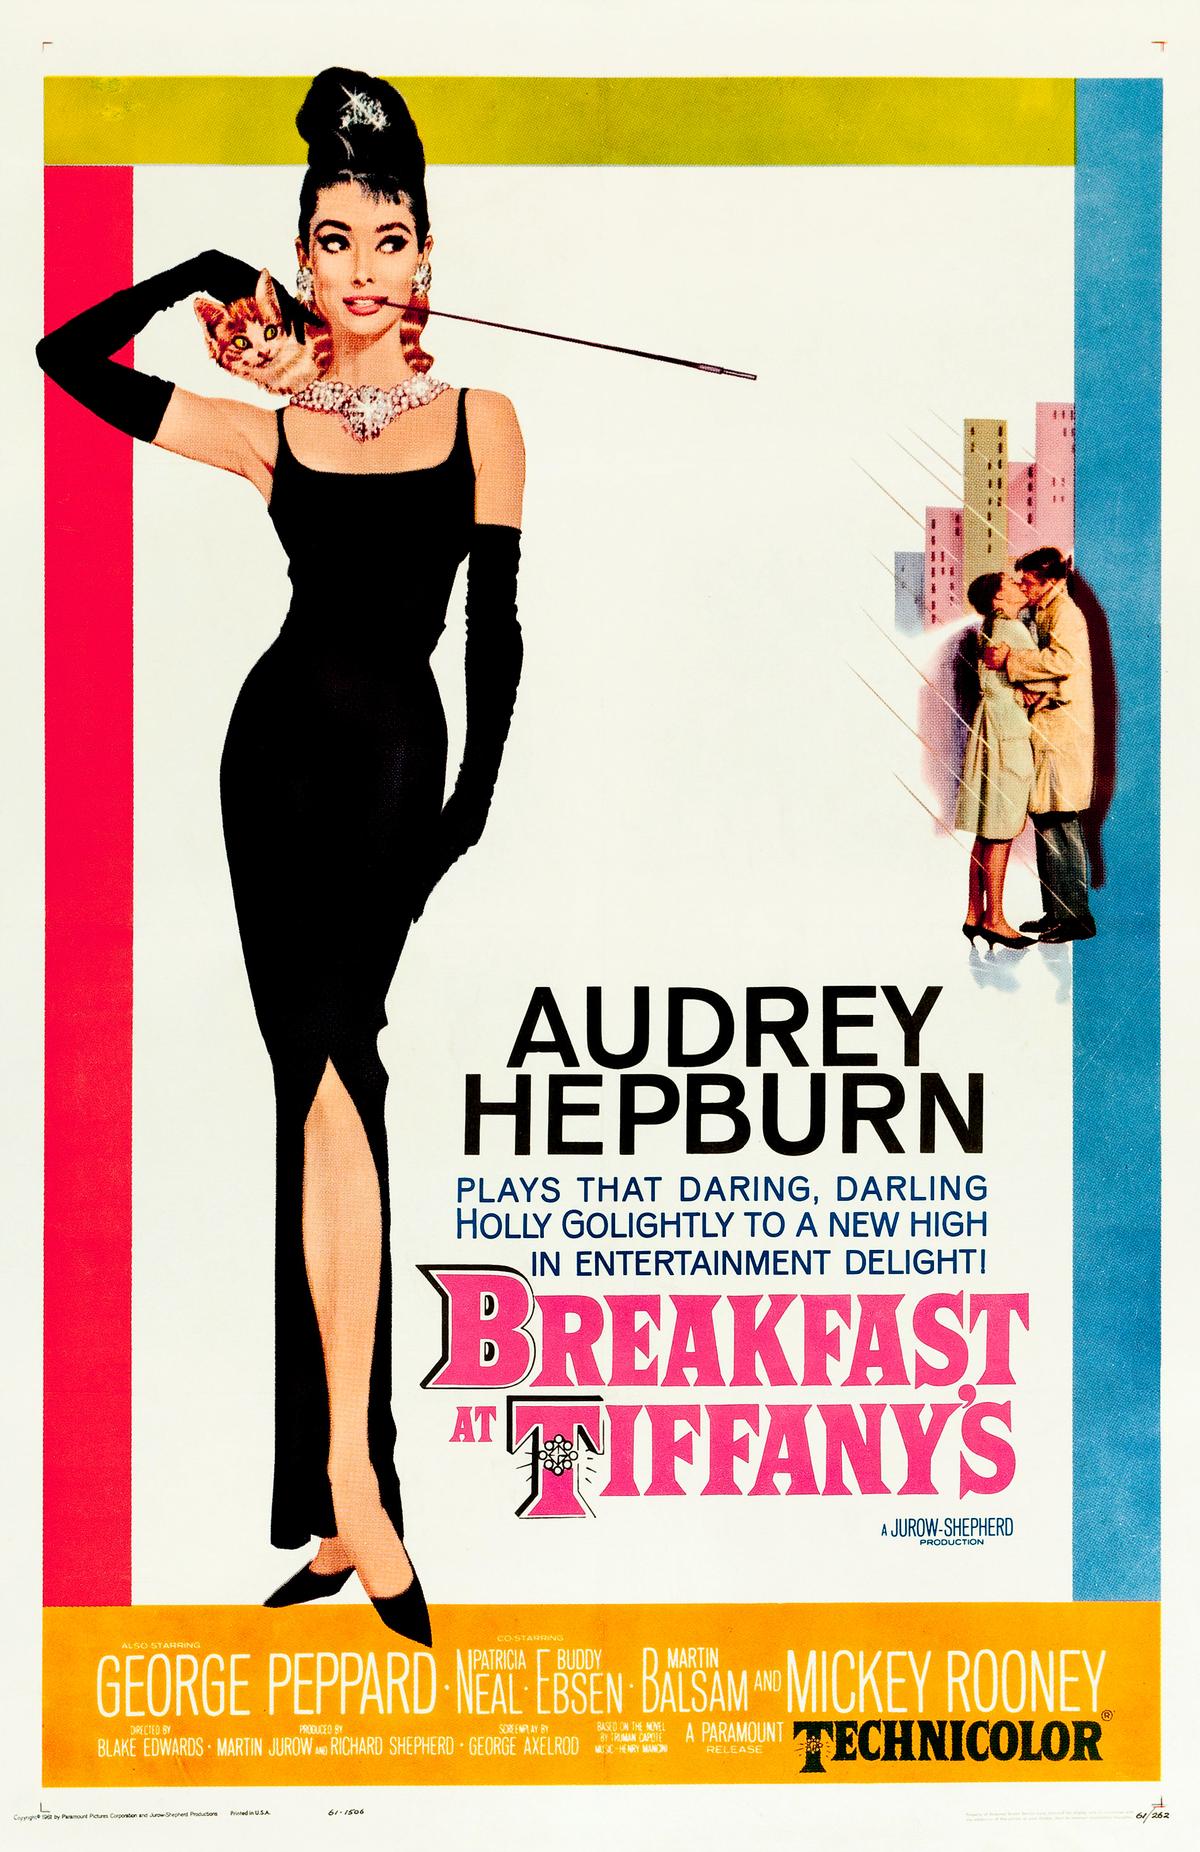 Theatrical poster for the American release of the 1961 film "Breakfast at Tiffany's." The illustration features Audrey Hepburn, who plays the character of New York City socialite Holly Golightly. (Public Domain)